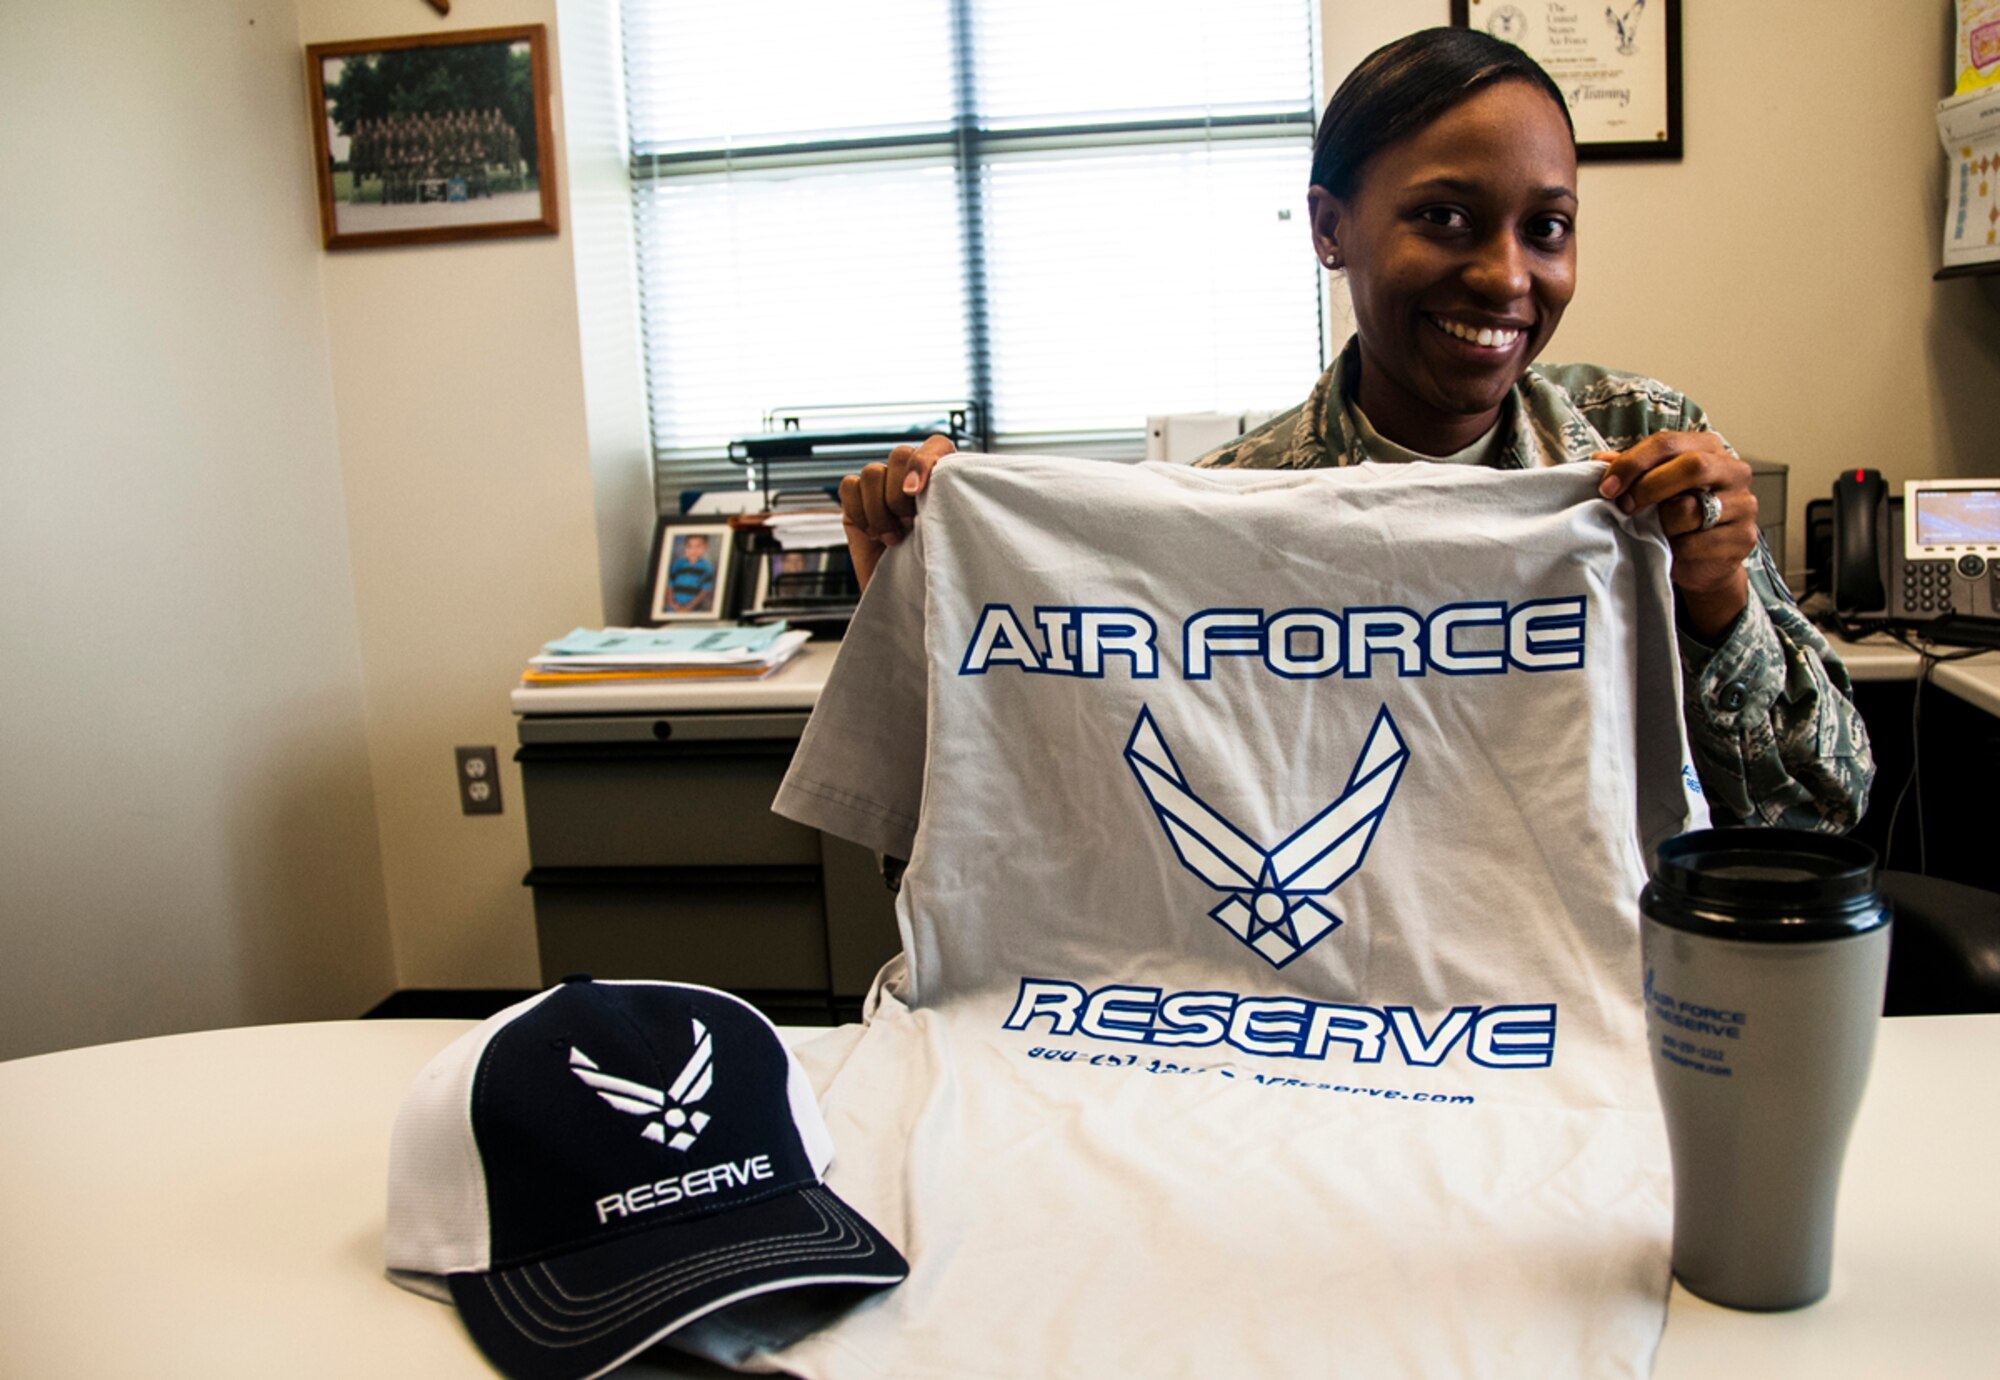 Tech. Sgt. Rickeita Conly is an Air Force Reserve recruiter. "Recruiting is exiting, and very rewarding," she said. "There's always something going on. I love it!" (U.S.. Air Force photo/Senior Airman Daniel Phelps)